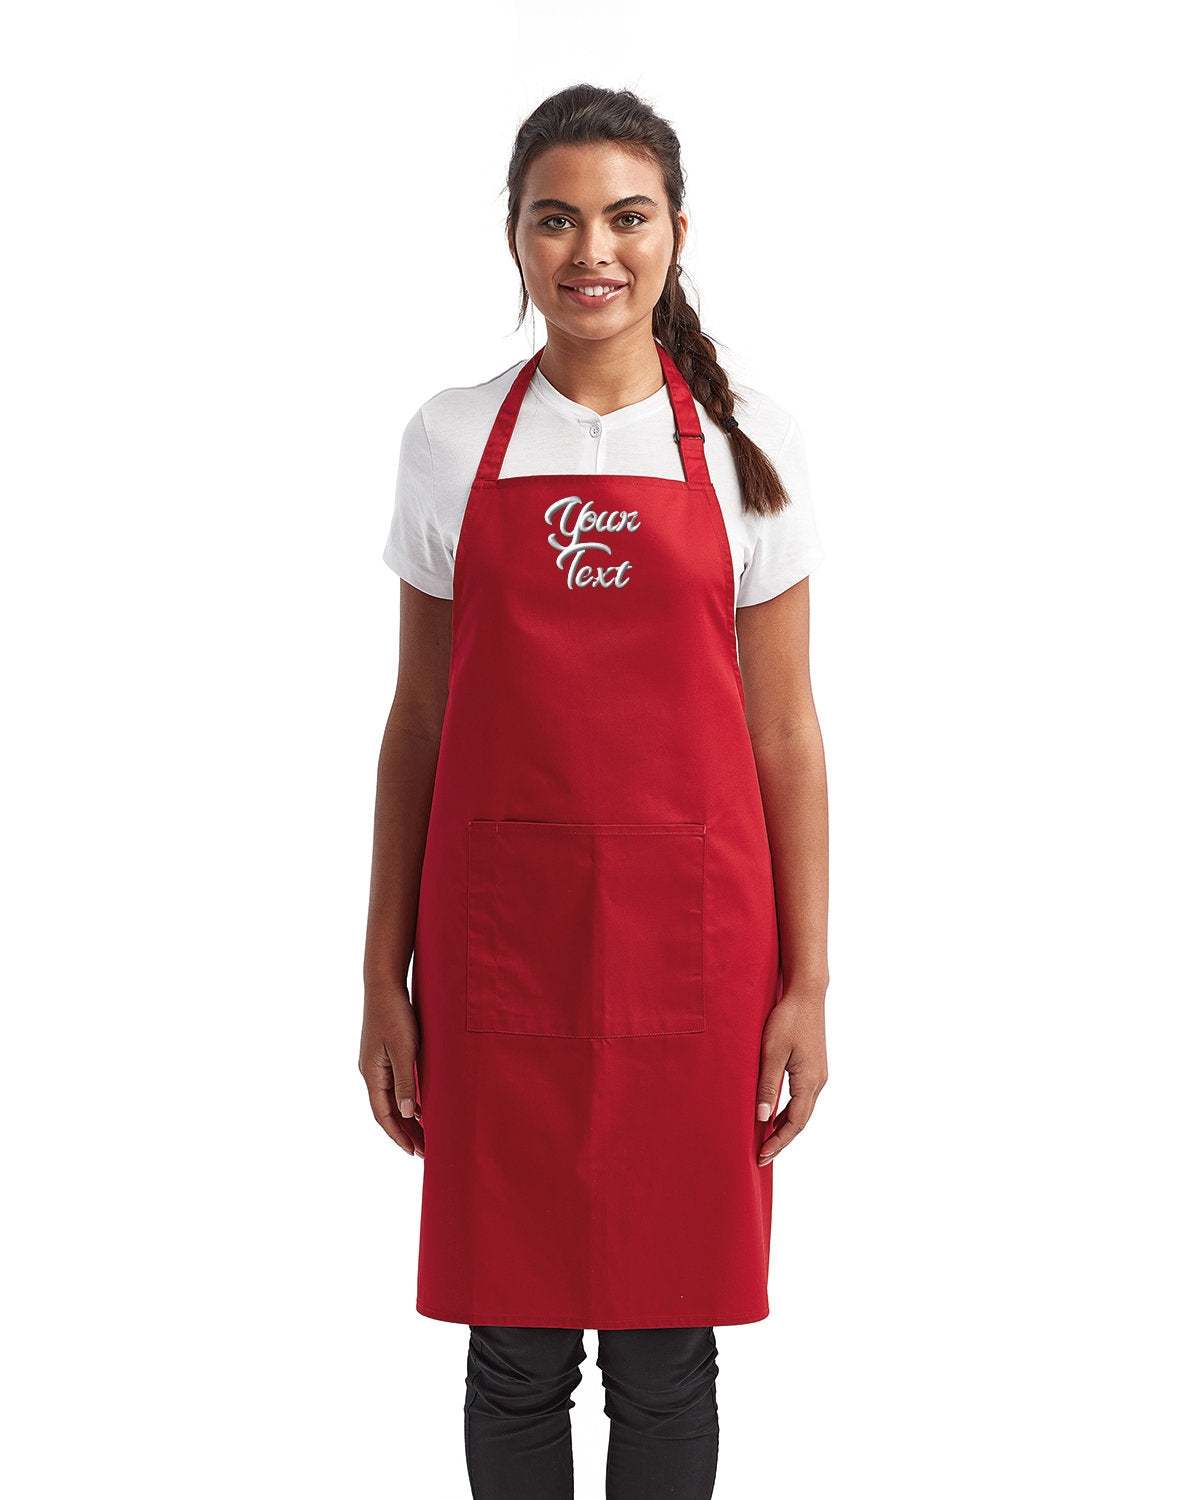 Restaurant Aprons with Your Company Name Embroidered - 3 Pack red